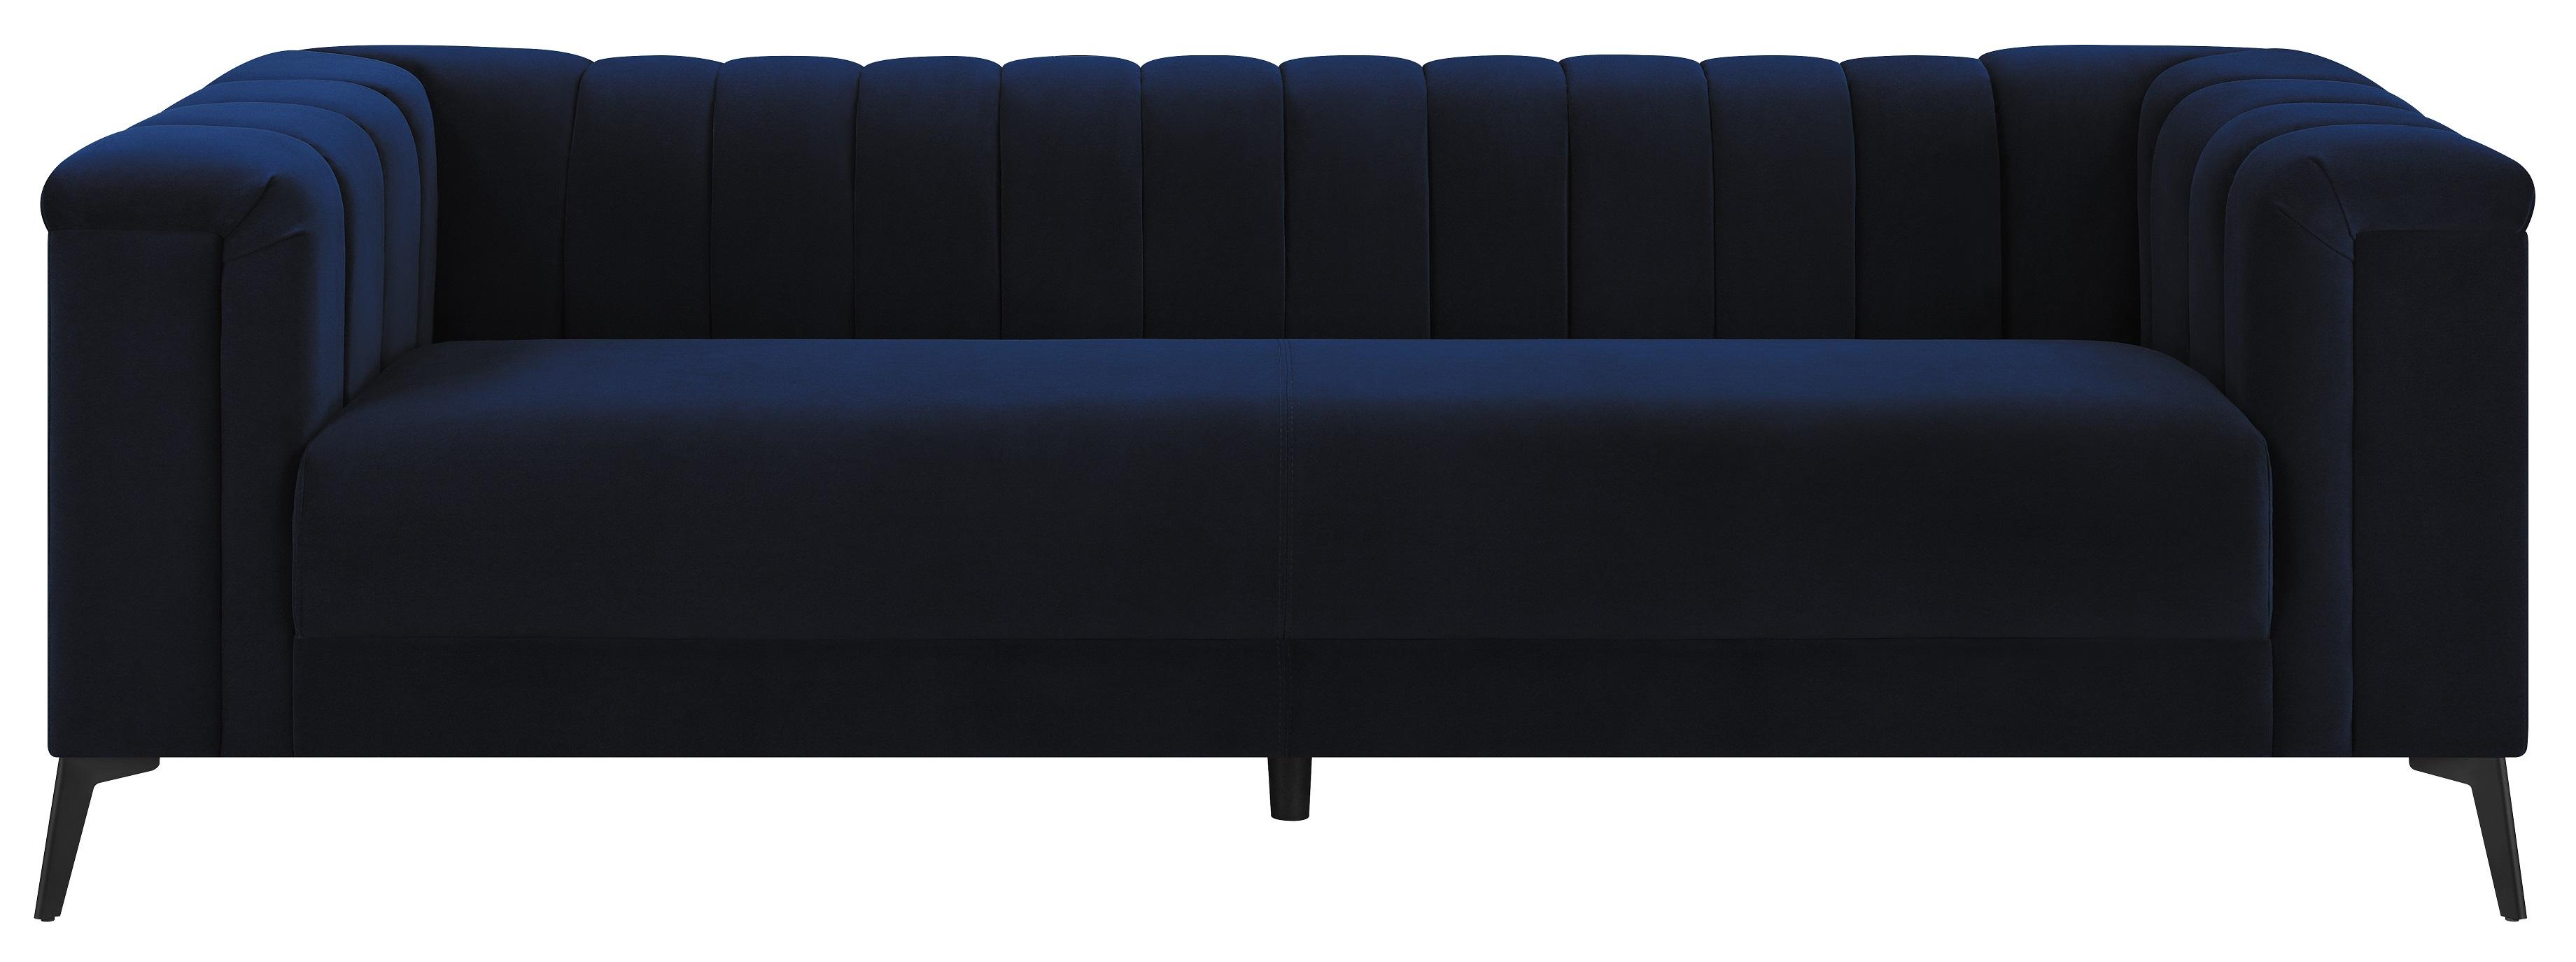 Transitional Sofa 509211 Chalet 509211 in Blue 